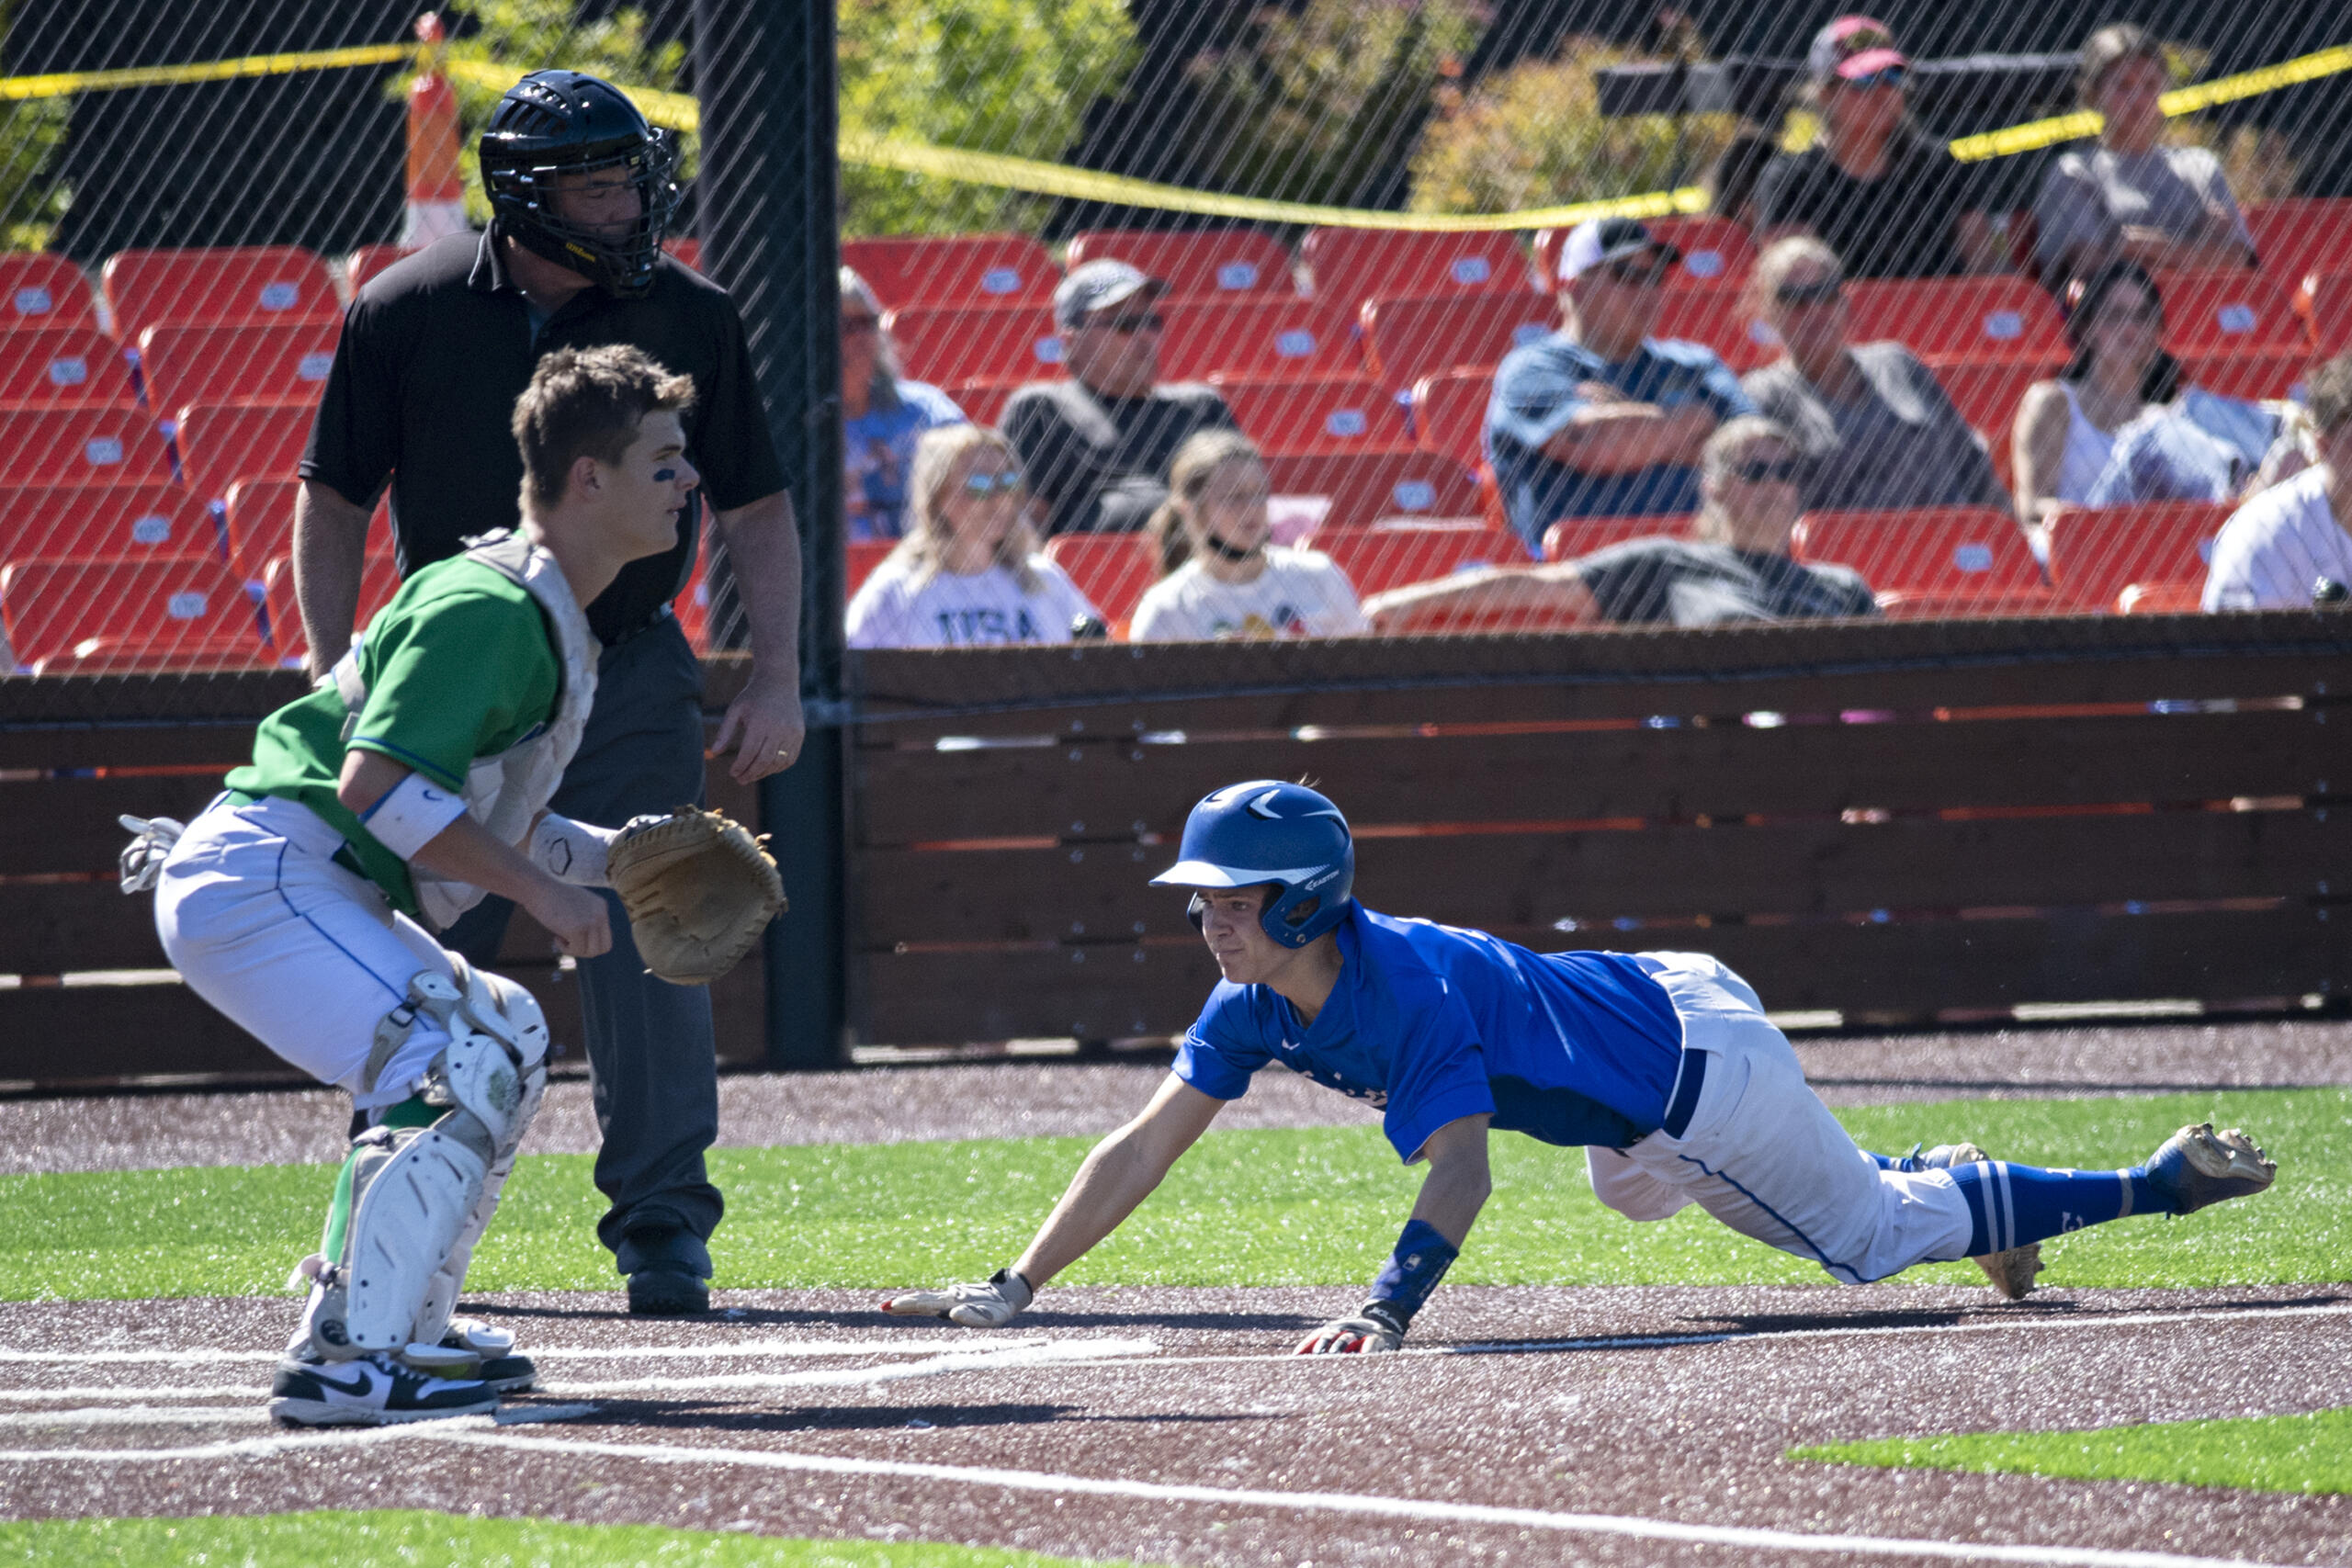 Mountain View's Riley McCarthy (7) of the National League waits for the throw as La Center's Michael Goode (7) of the American League comes in to score in the first inning during the Senior All-Star Game at Ridgefield Outdoor Recreation Center on Wednesday afternoon, June 16, 2021.